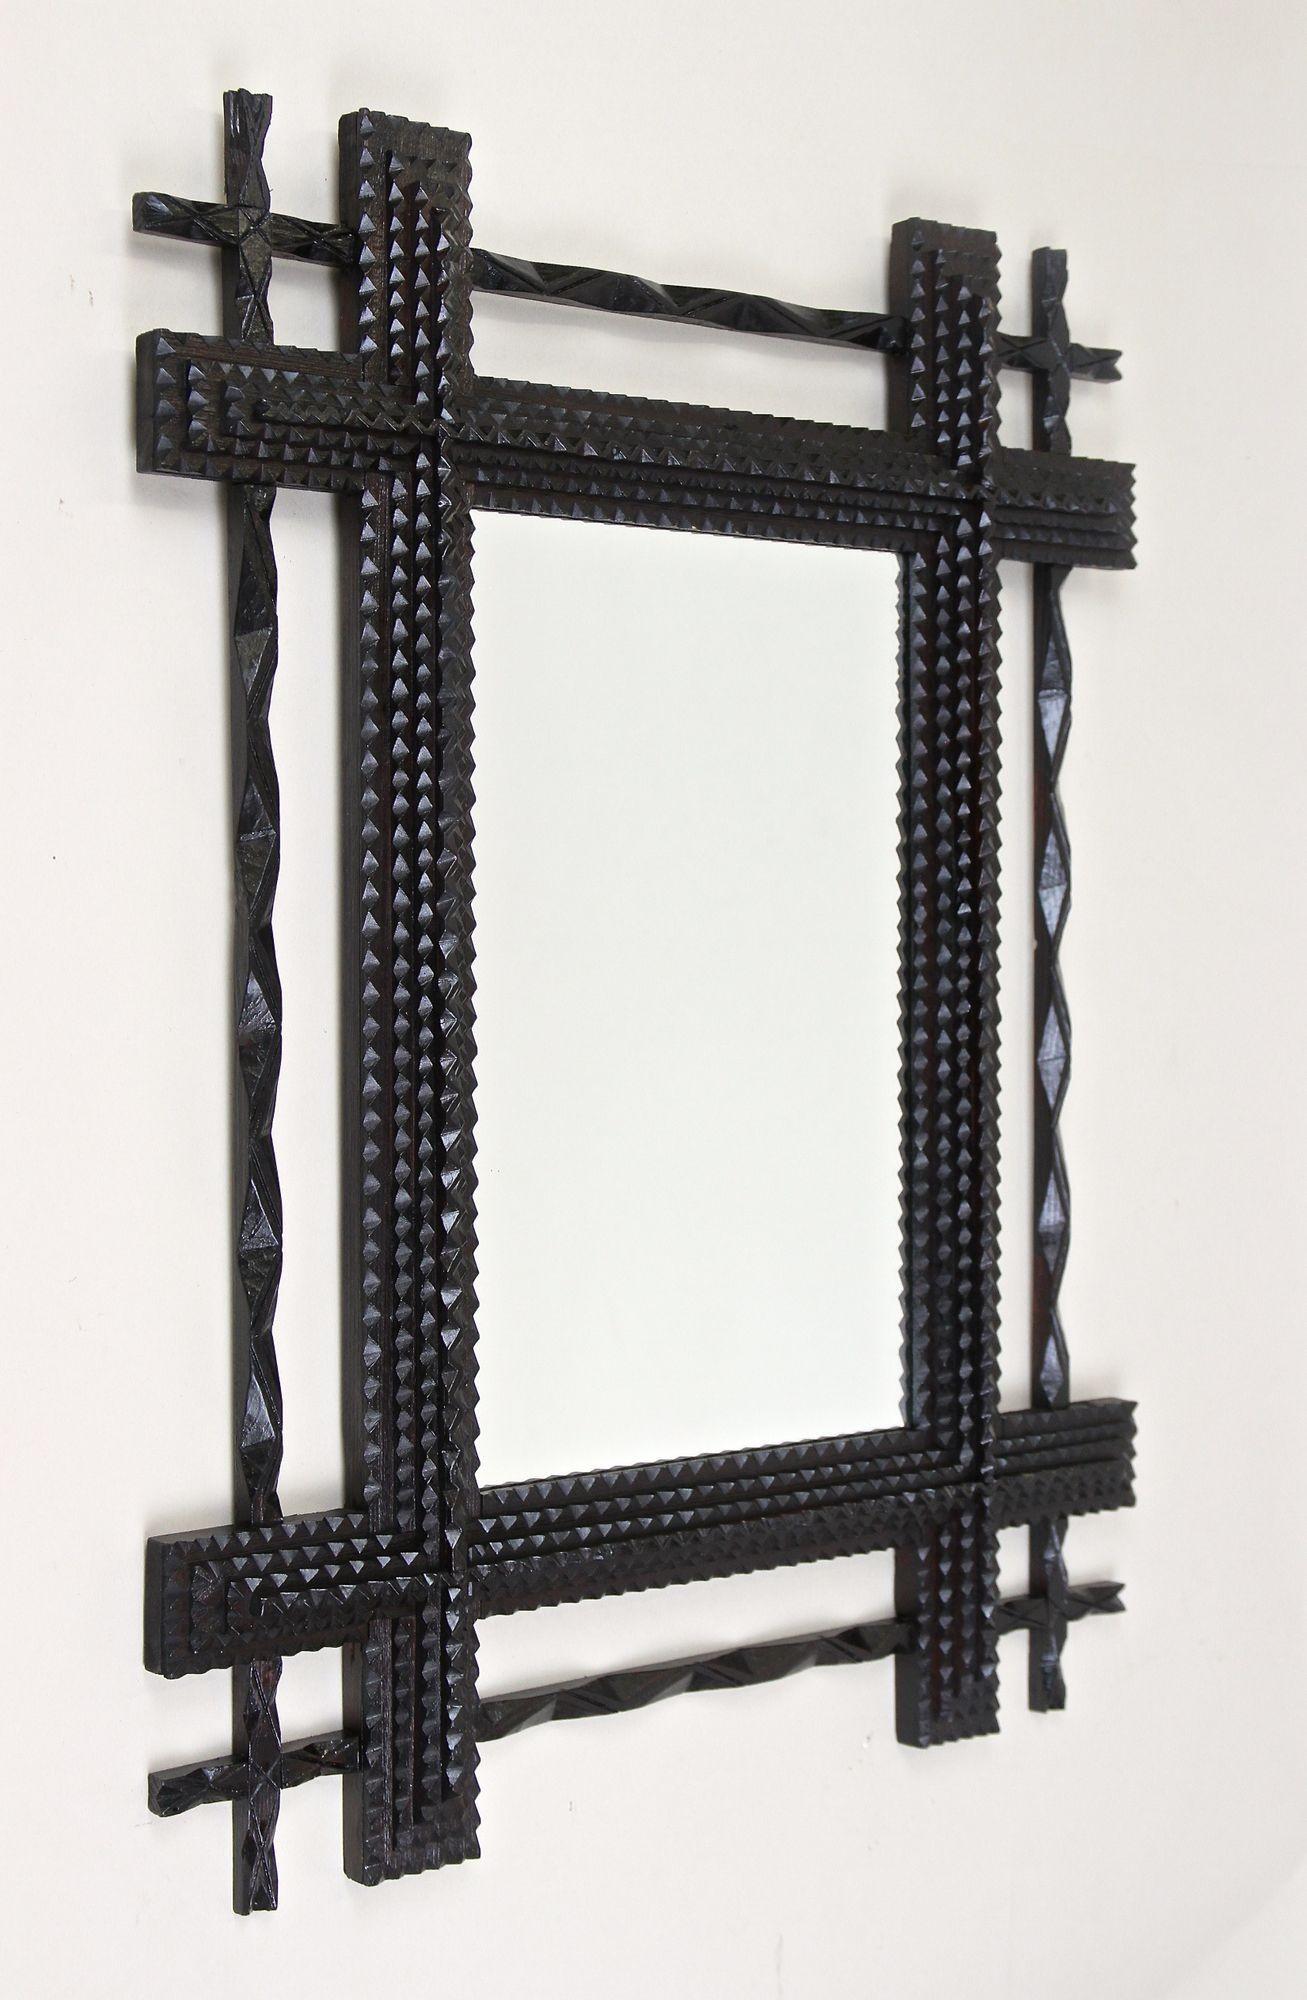 Exceptional Tramp Art wall mirror from the late 19th centuryin Austria. This lovely rustic wall mirror from the period around 1890 convinces with its great design concept: the dark stained doubled frame impresses with an unique carved narrower outer